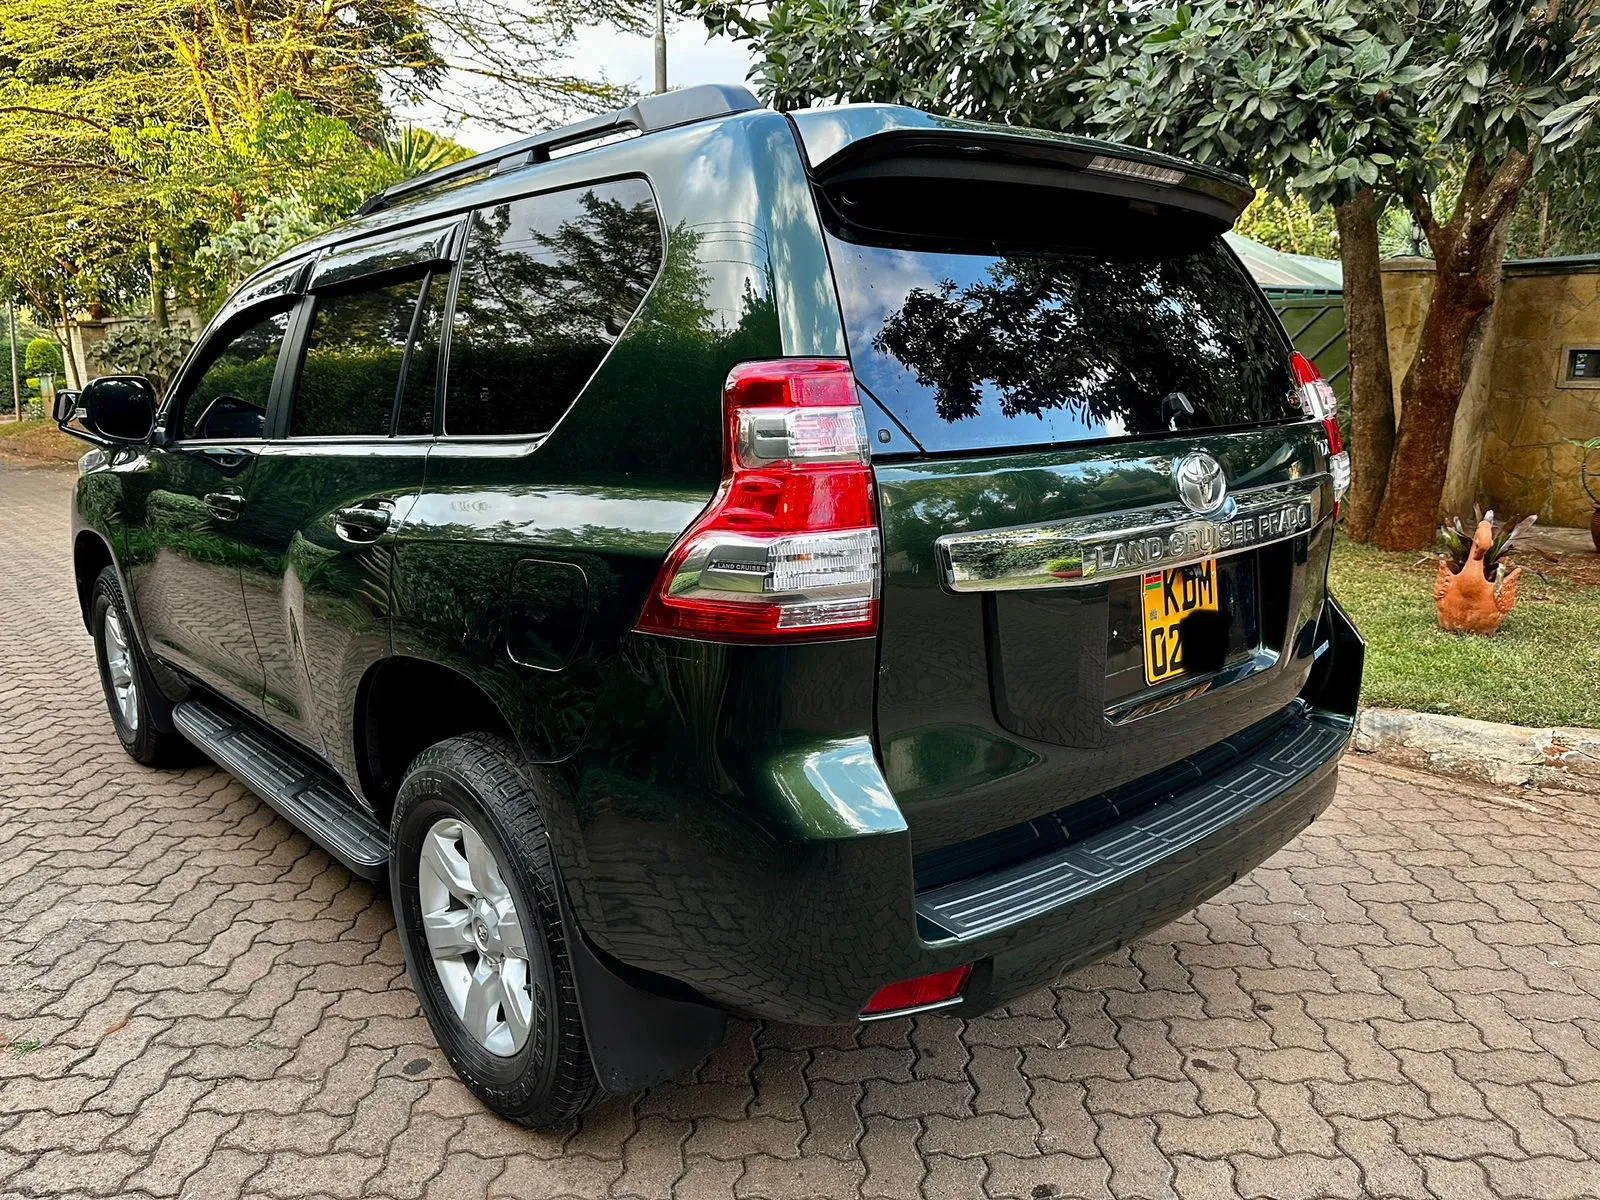 Toyota PRADO for sale in Kenya Sunroof Quick SALE TRADE IN OK EXCLUSIVE! Hire purchase installments